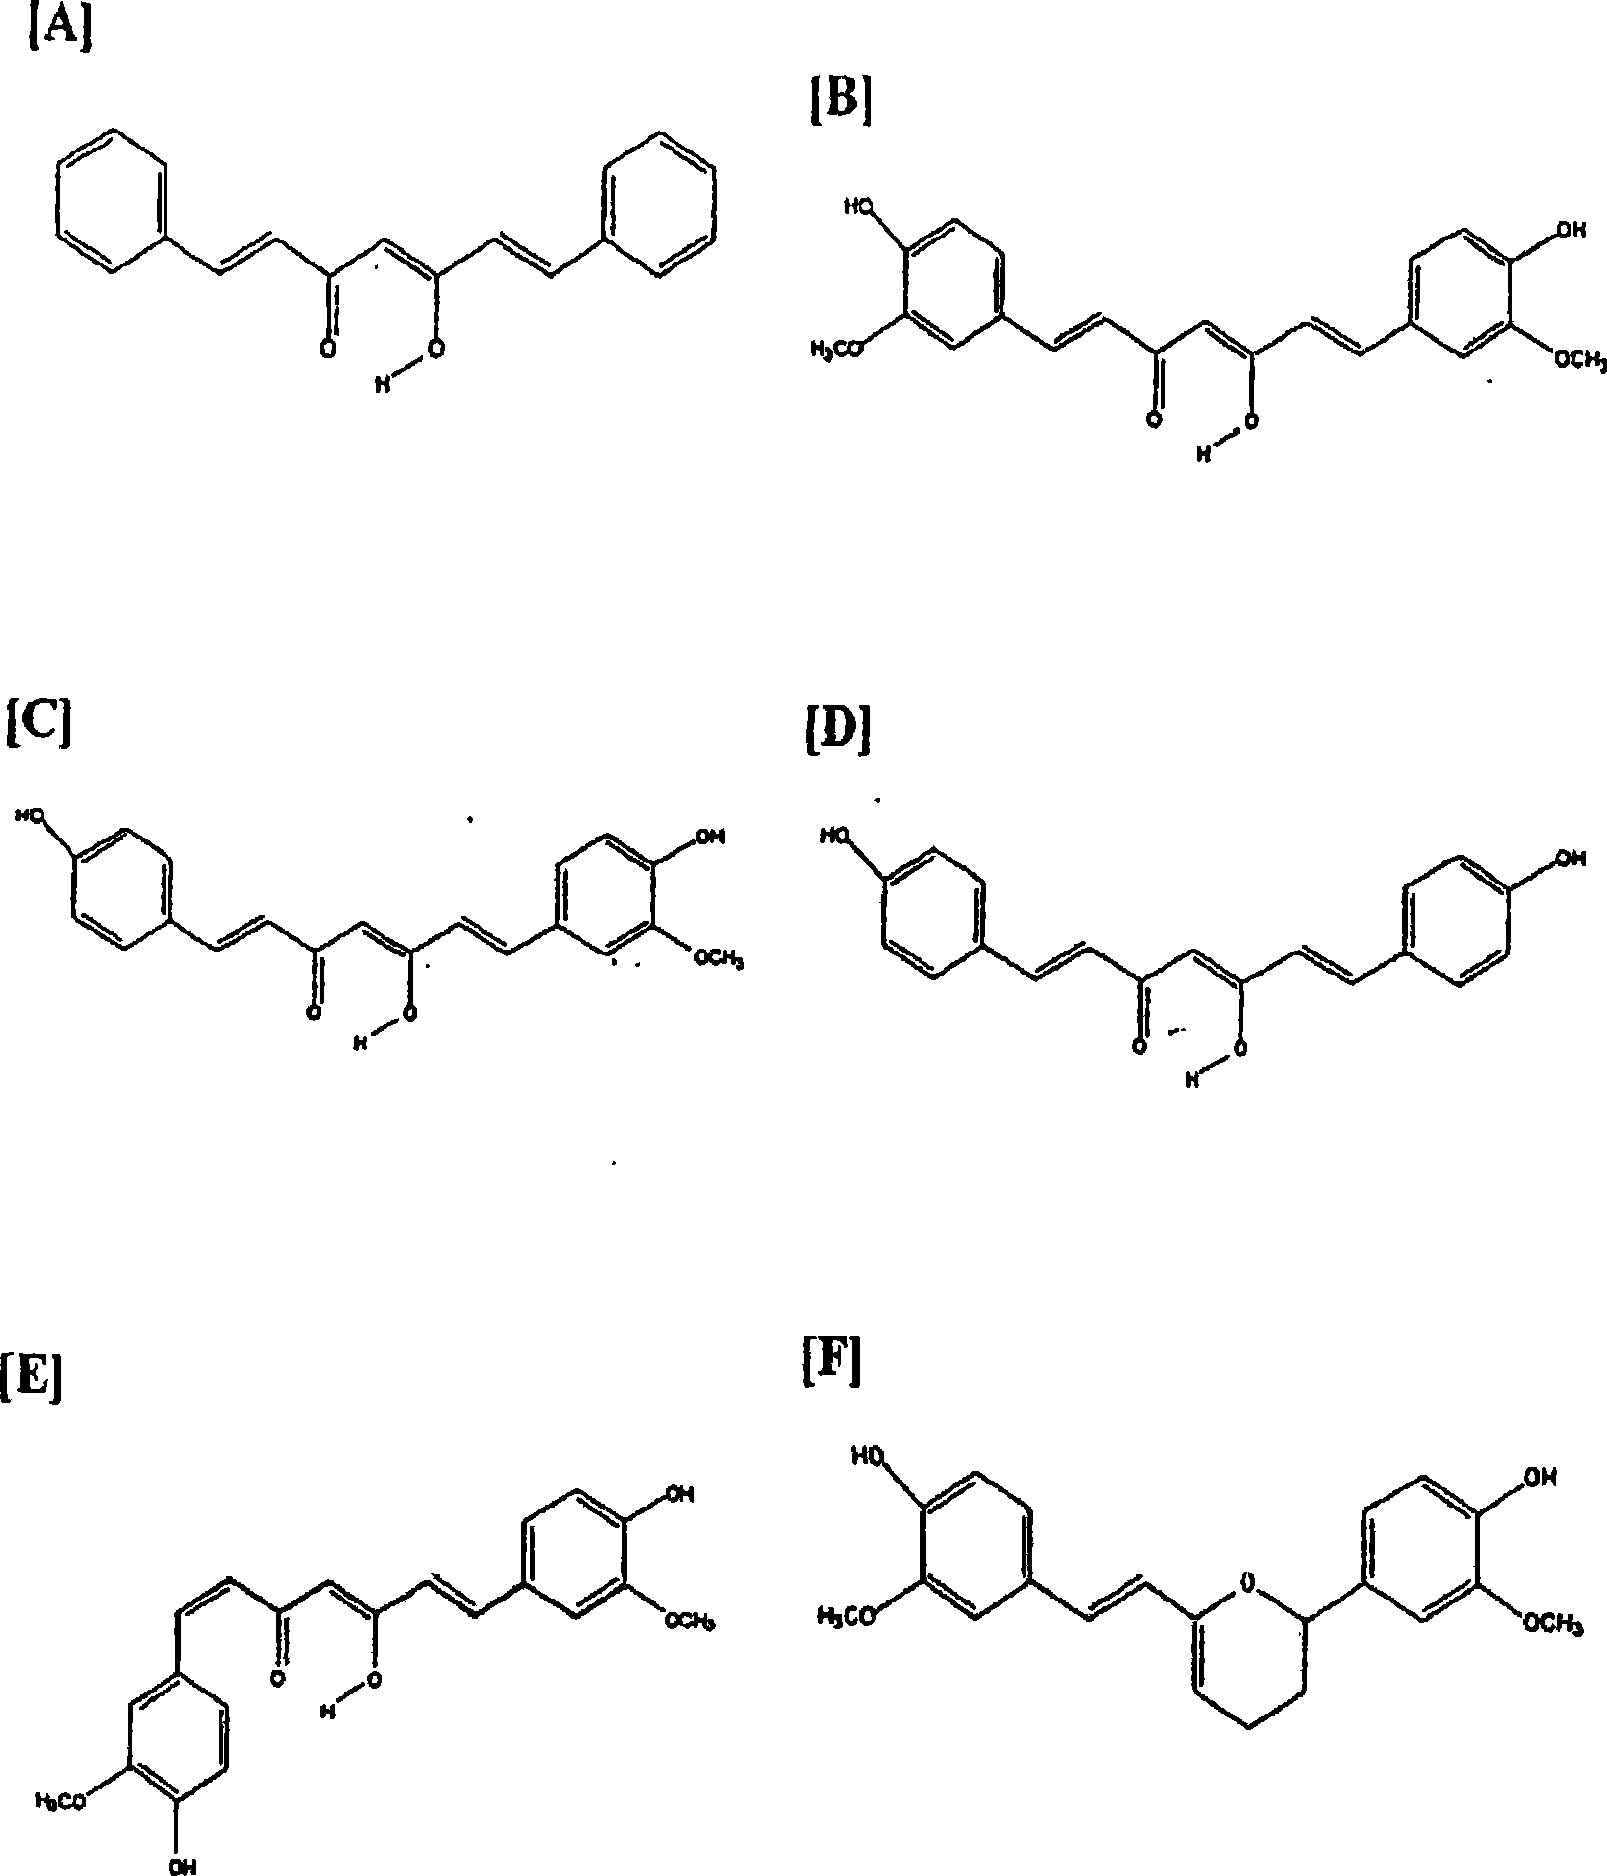 Compositions exhibiting inhibition of cyclooxygenase-2